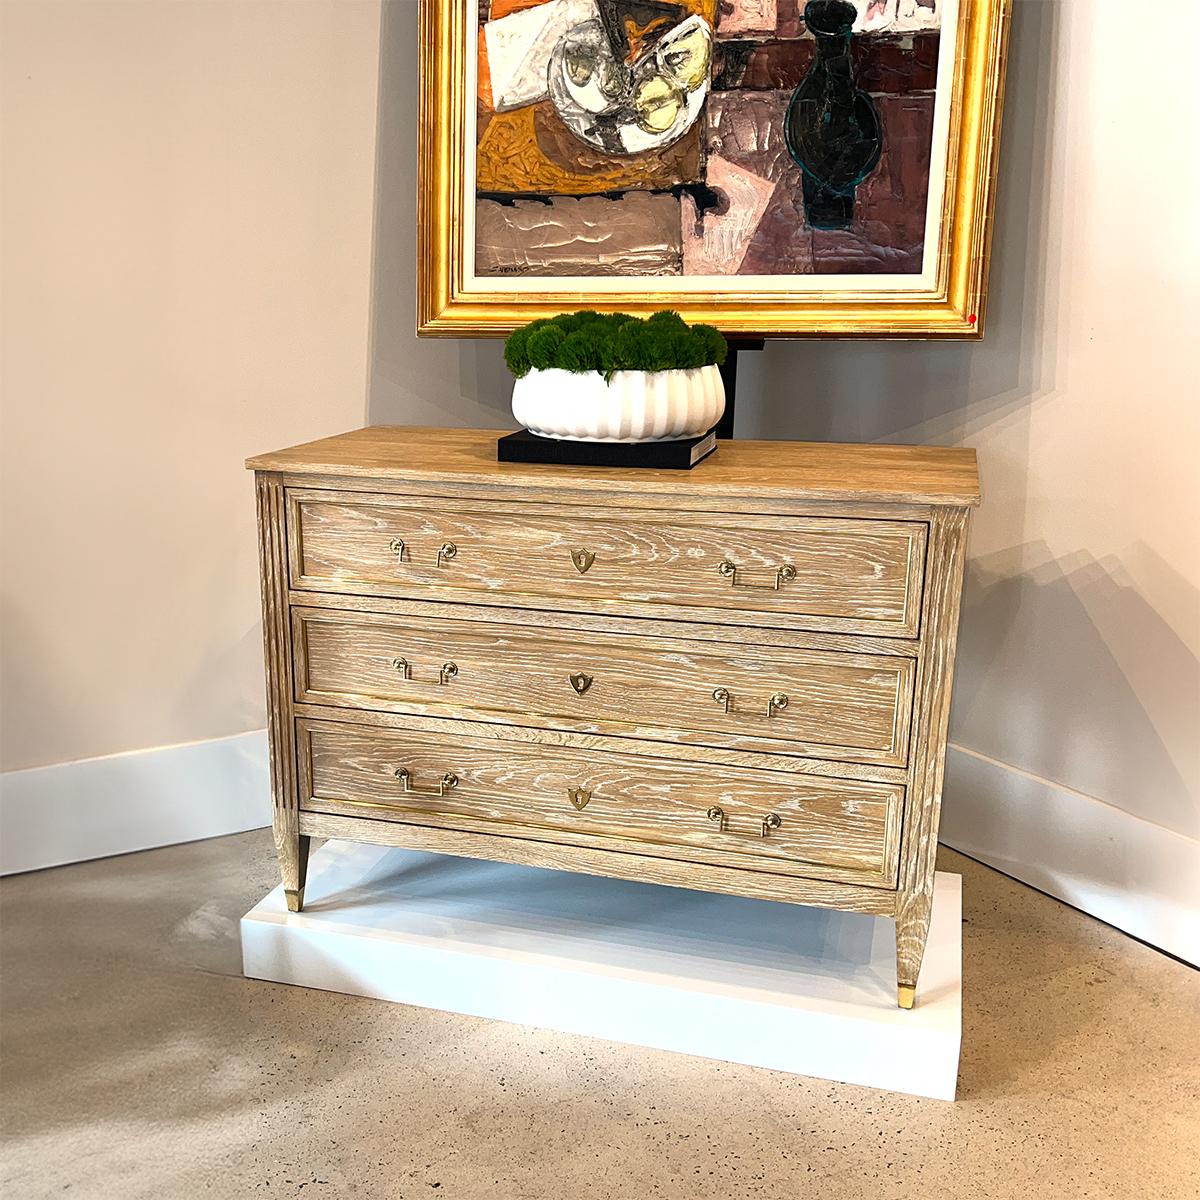 A late 18th-century style Neo Classic dresser. With three long soft closing drawers in a natural oak veneer finish, with paneled sides, polished brass accents and hardware, fluted styles, on square tapered legs with brass sabots.

Dimensions: 50